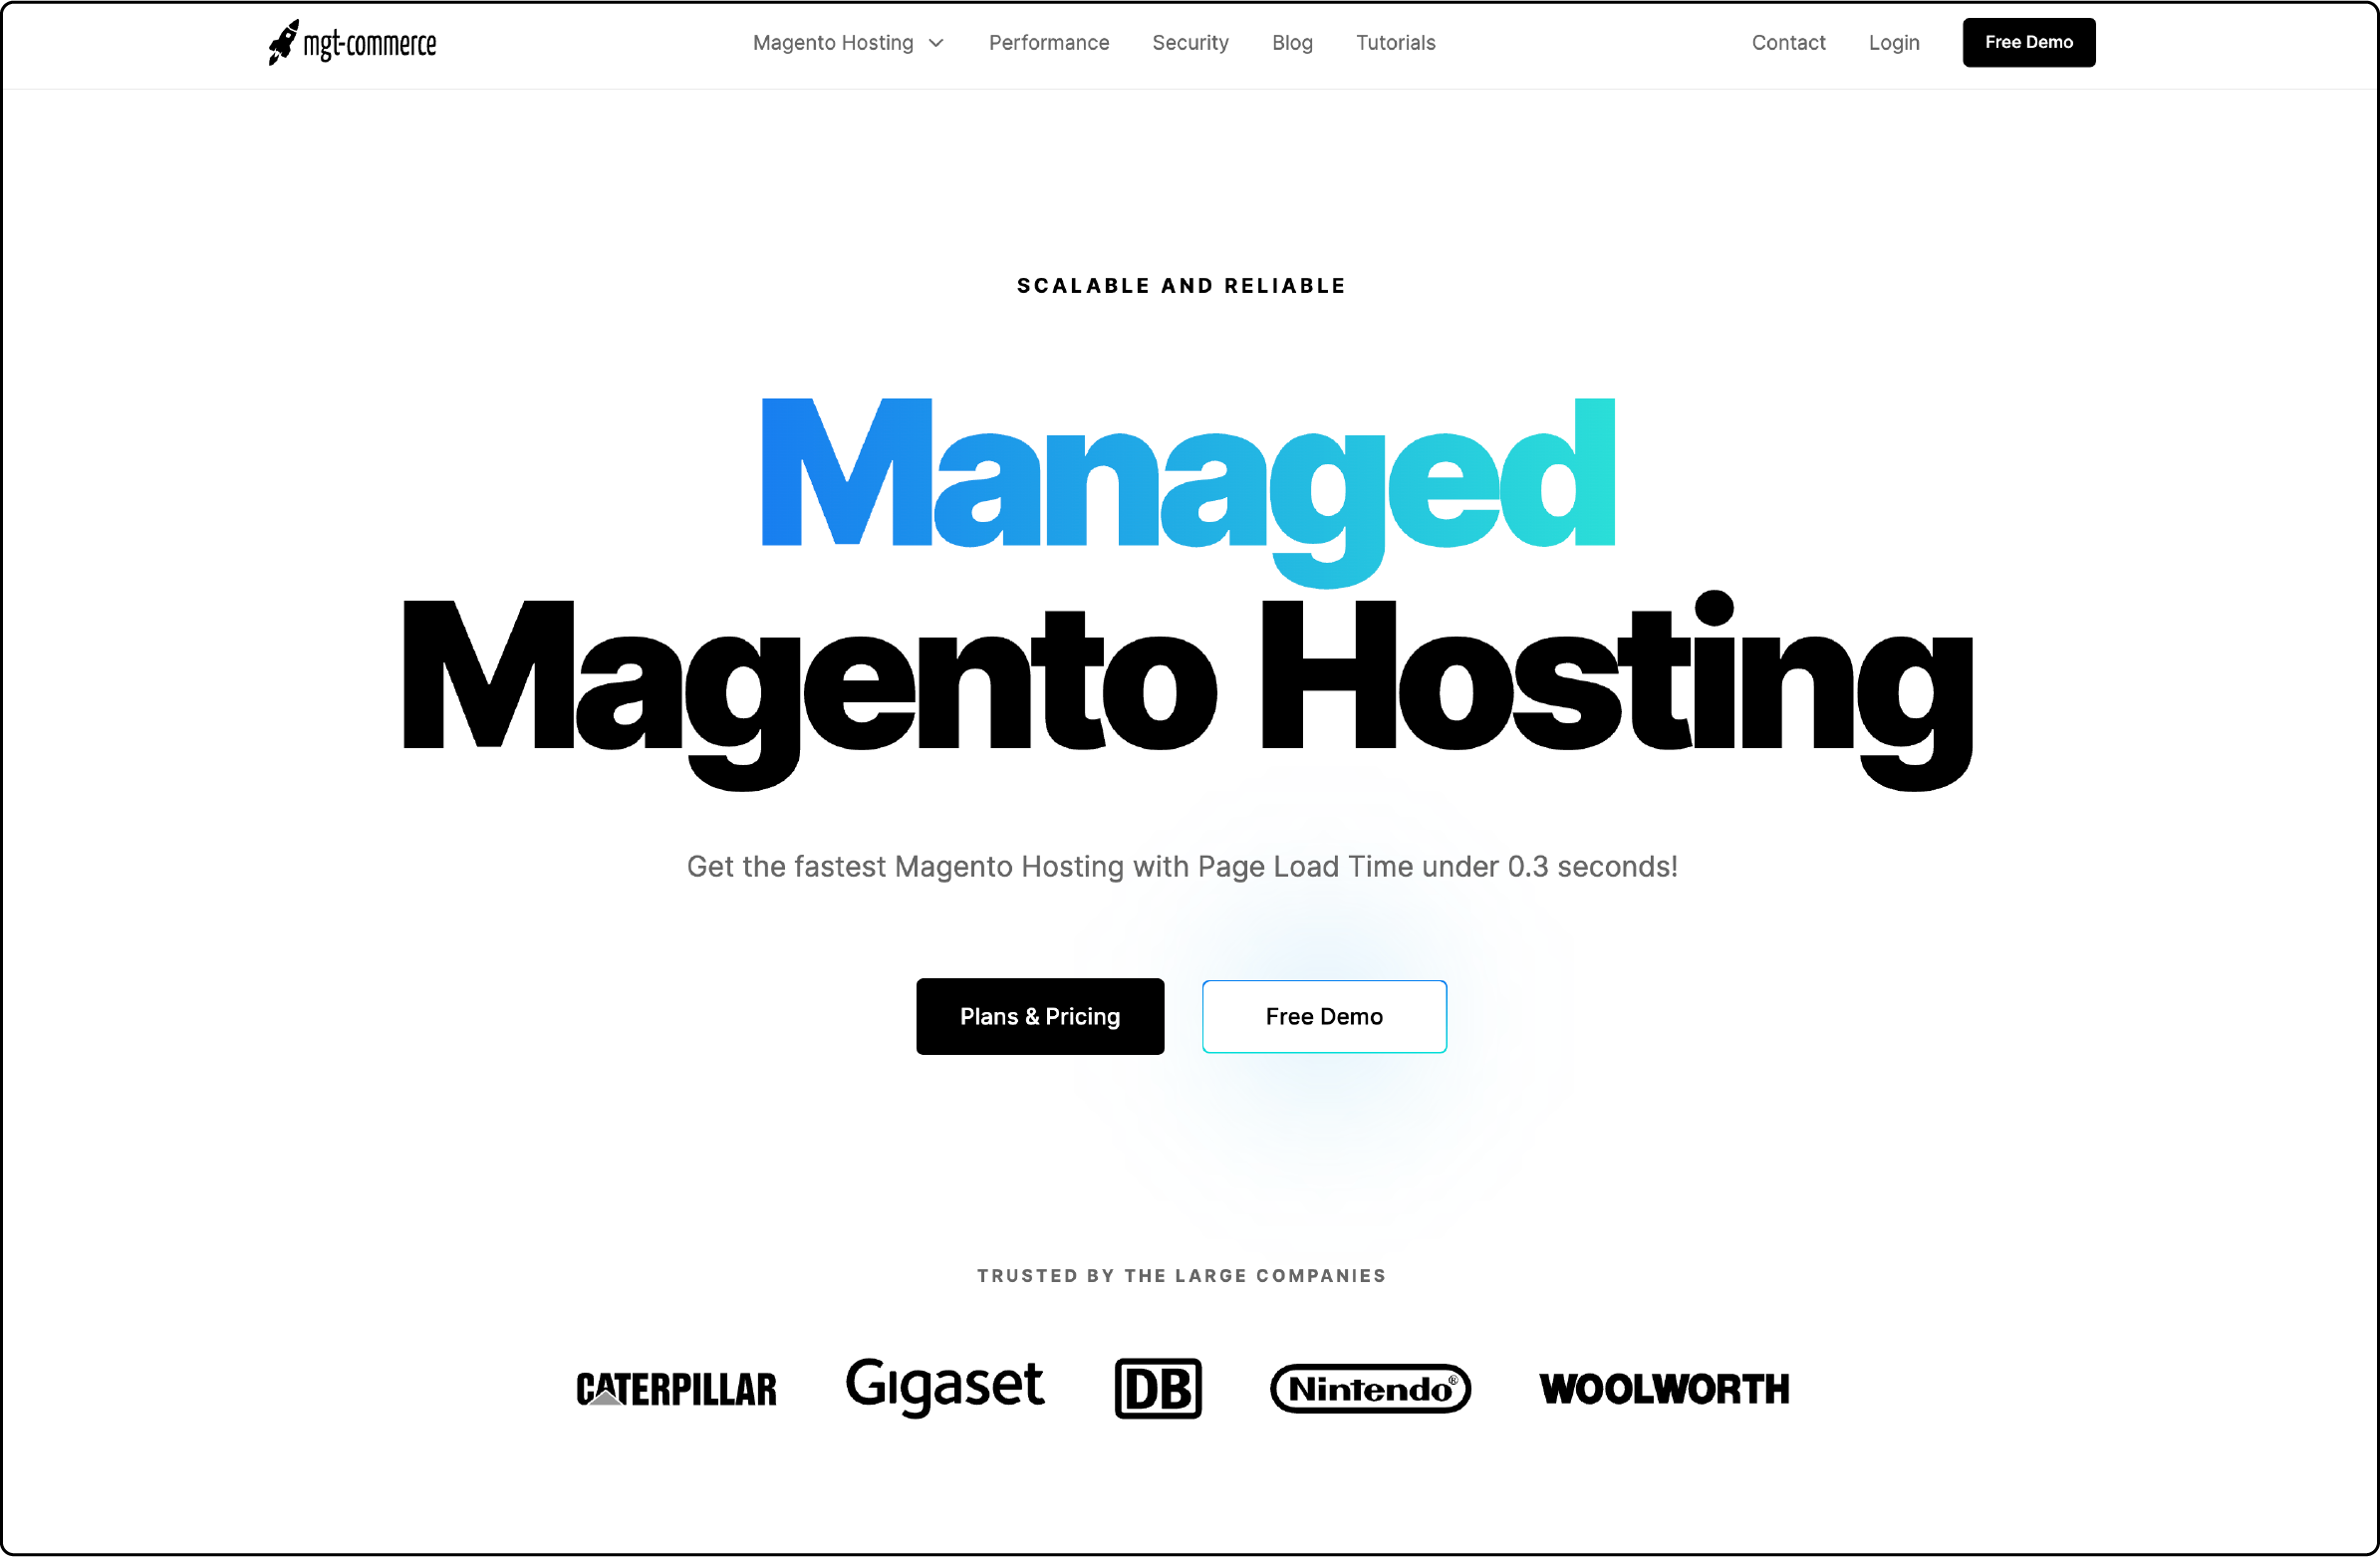 MGT-Commerce as the dedicated hosting partner for Magento platforms